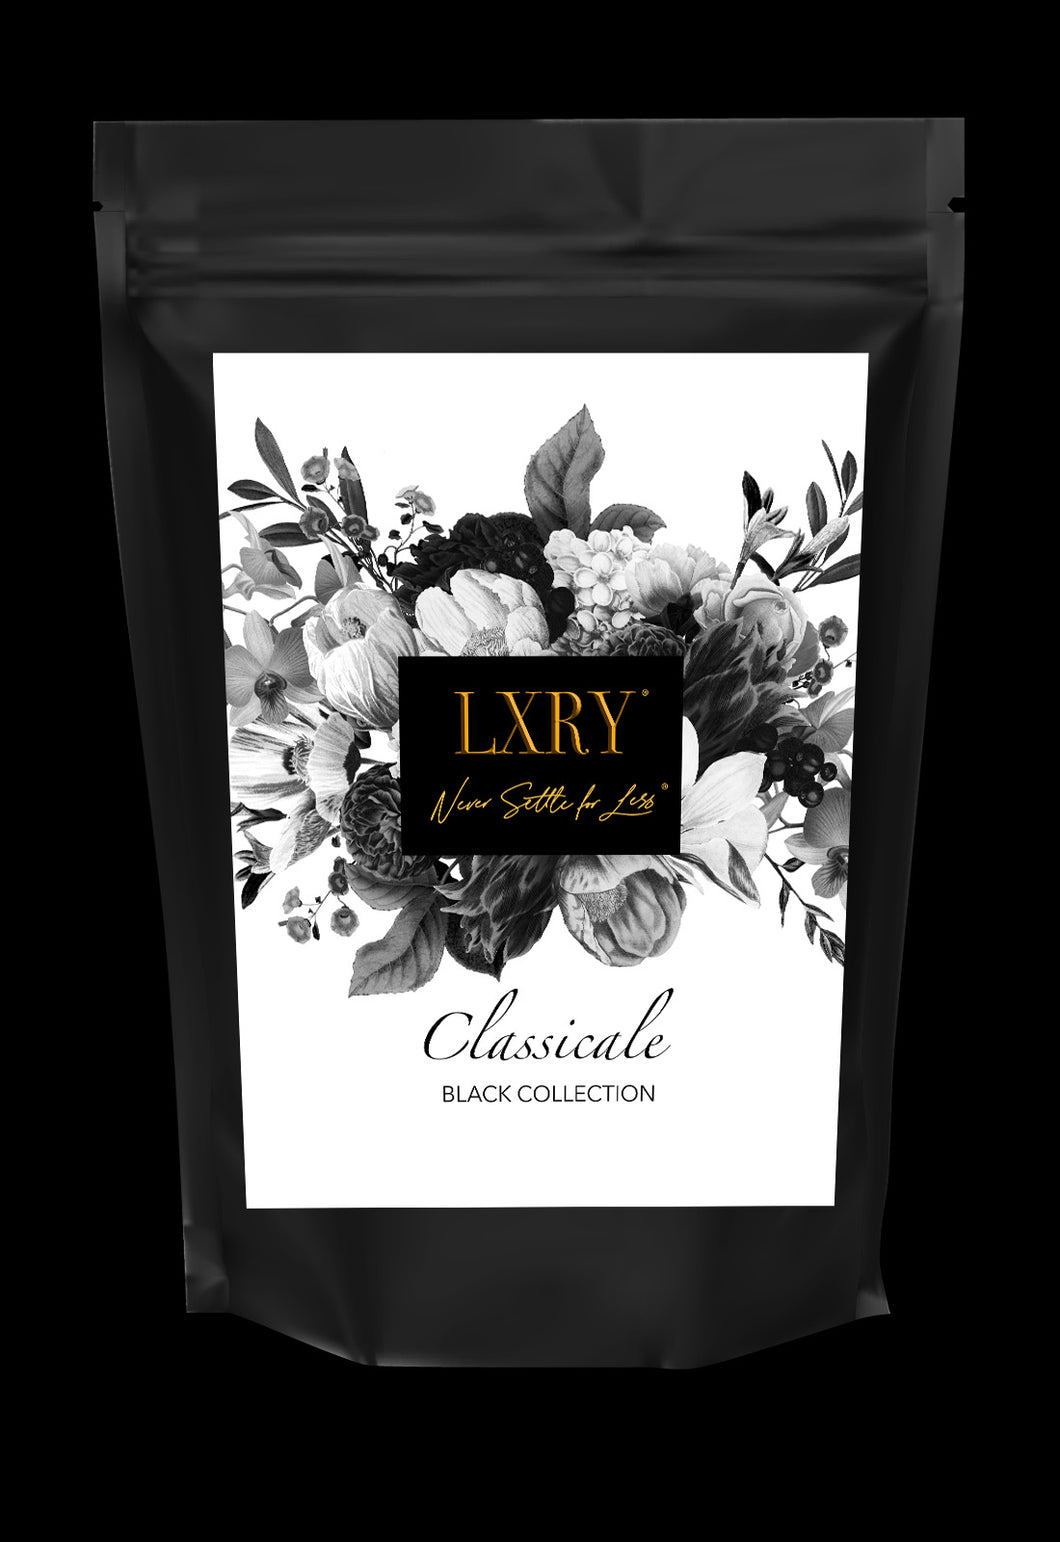 Classicale (Black Collection)